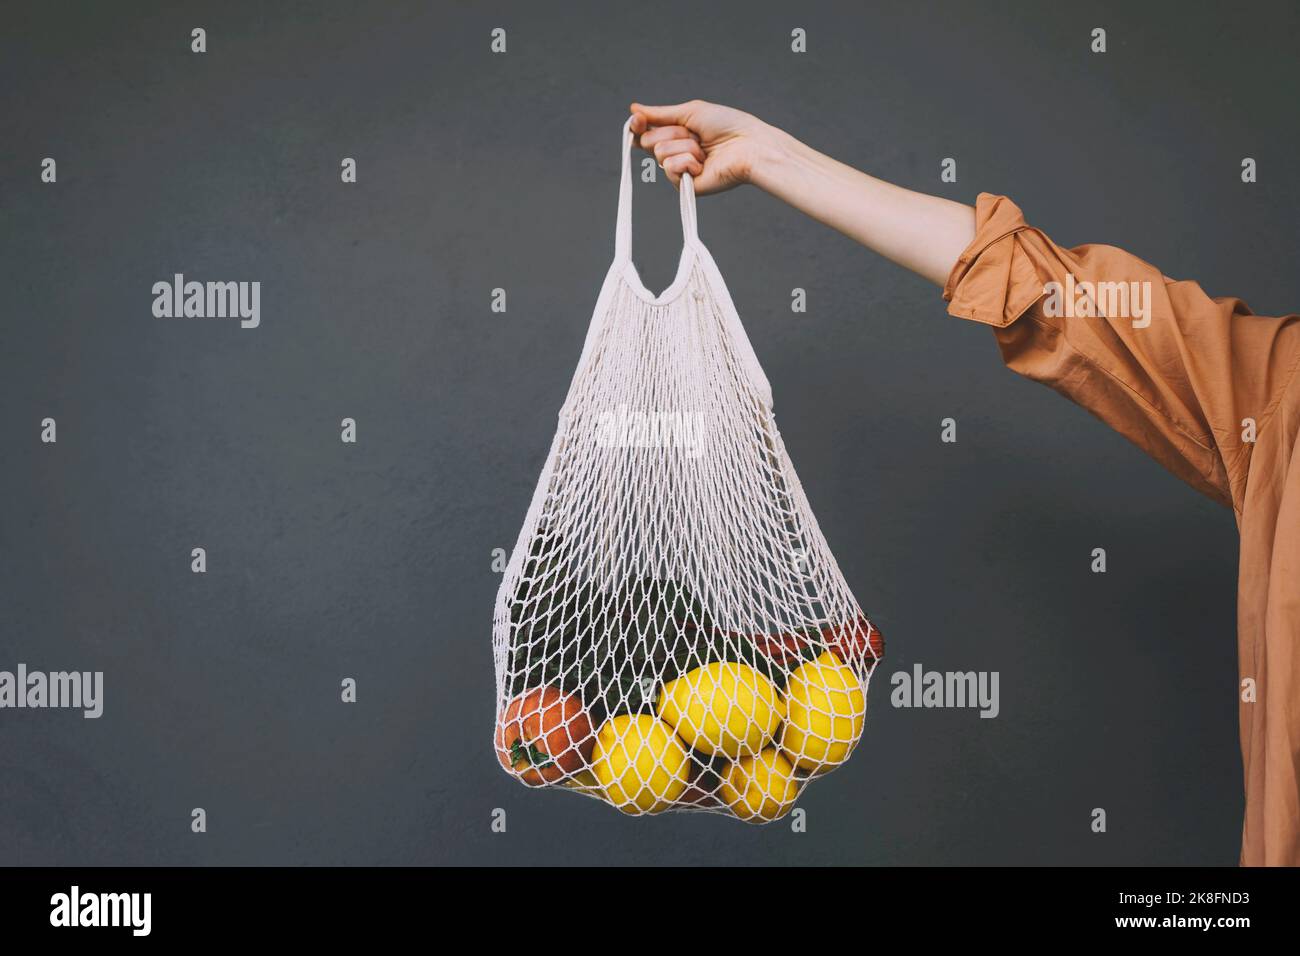 Woman holding lemons and vegetables in mesh bag against gray background Stock Photo